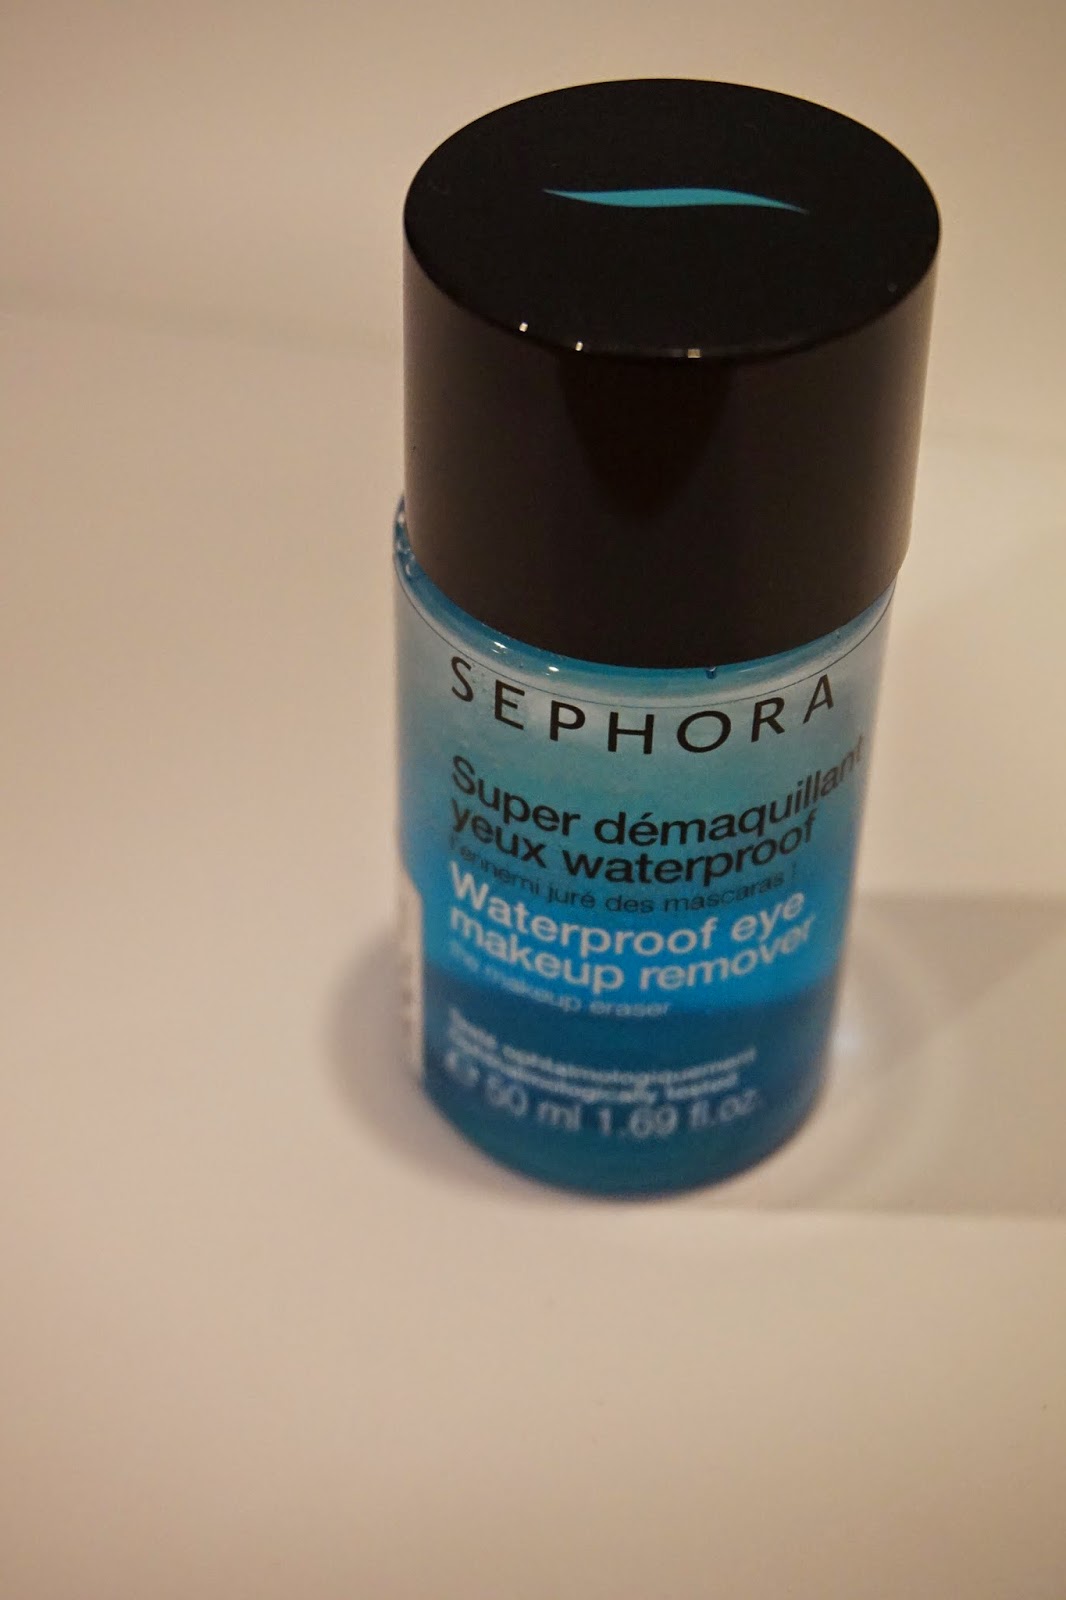 Sephora Haul and mini reviews - Sephora Waterproof Eye Makeup Remover - Dusty Foxes Beauty Blog